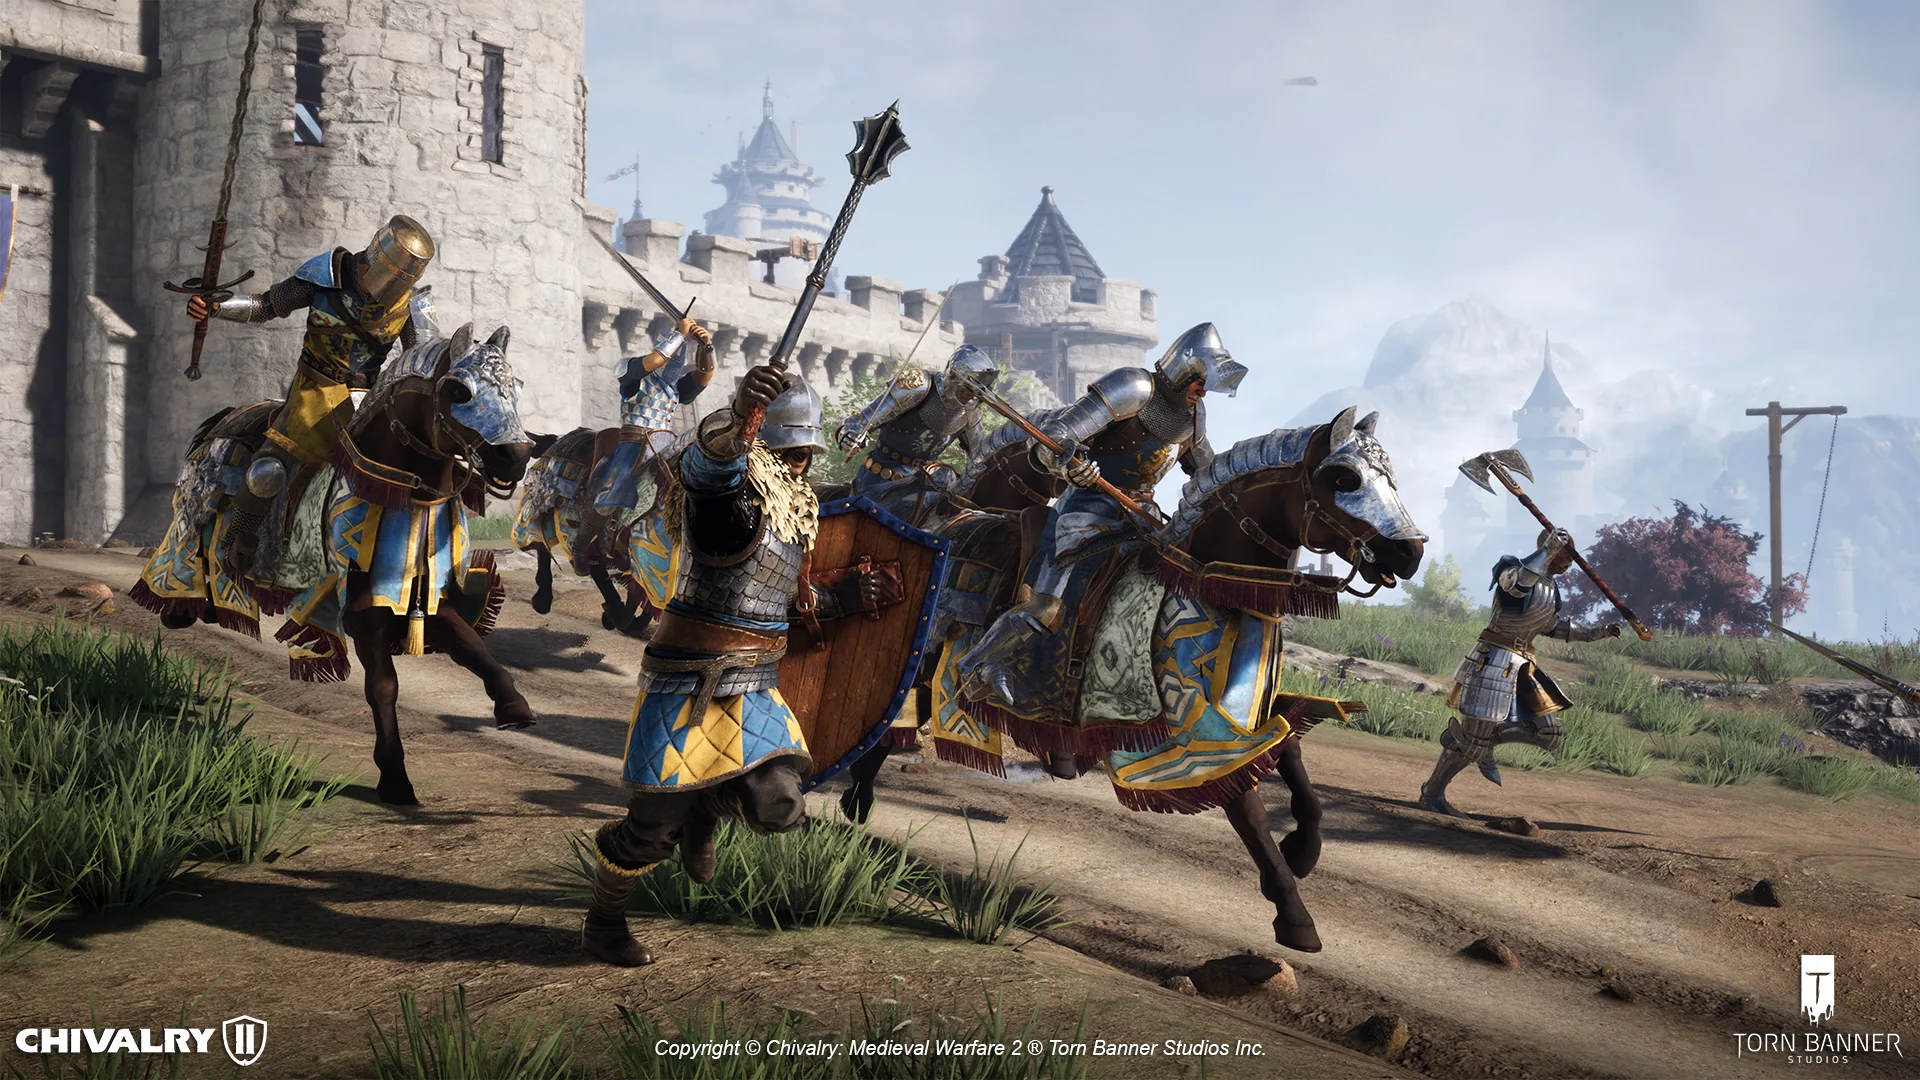 Chivalry 2 Is Free To Play Right Now For The Whole Weekend